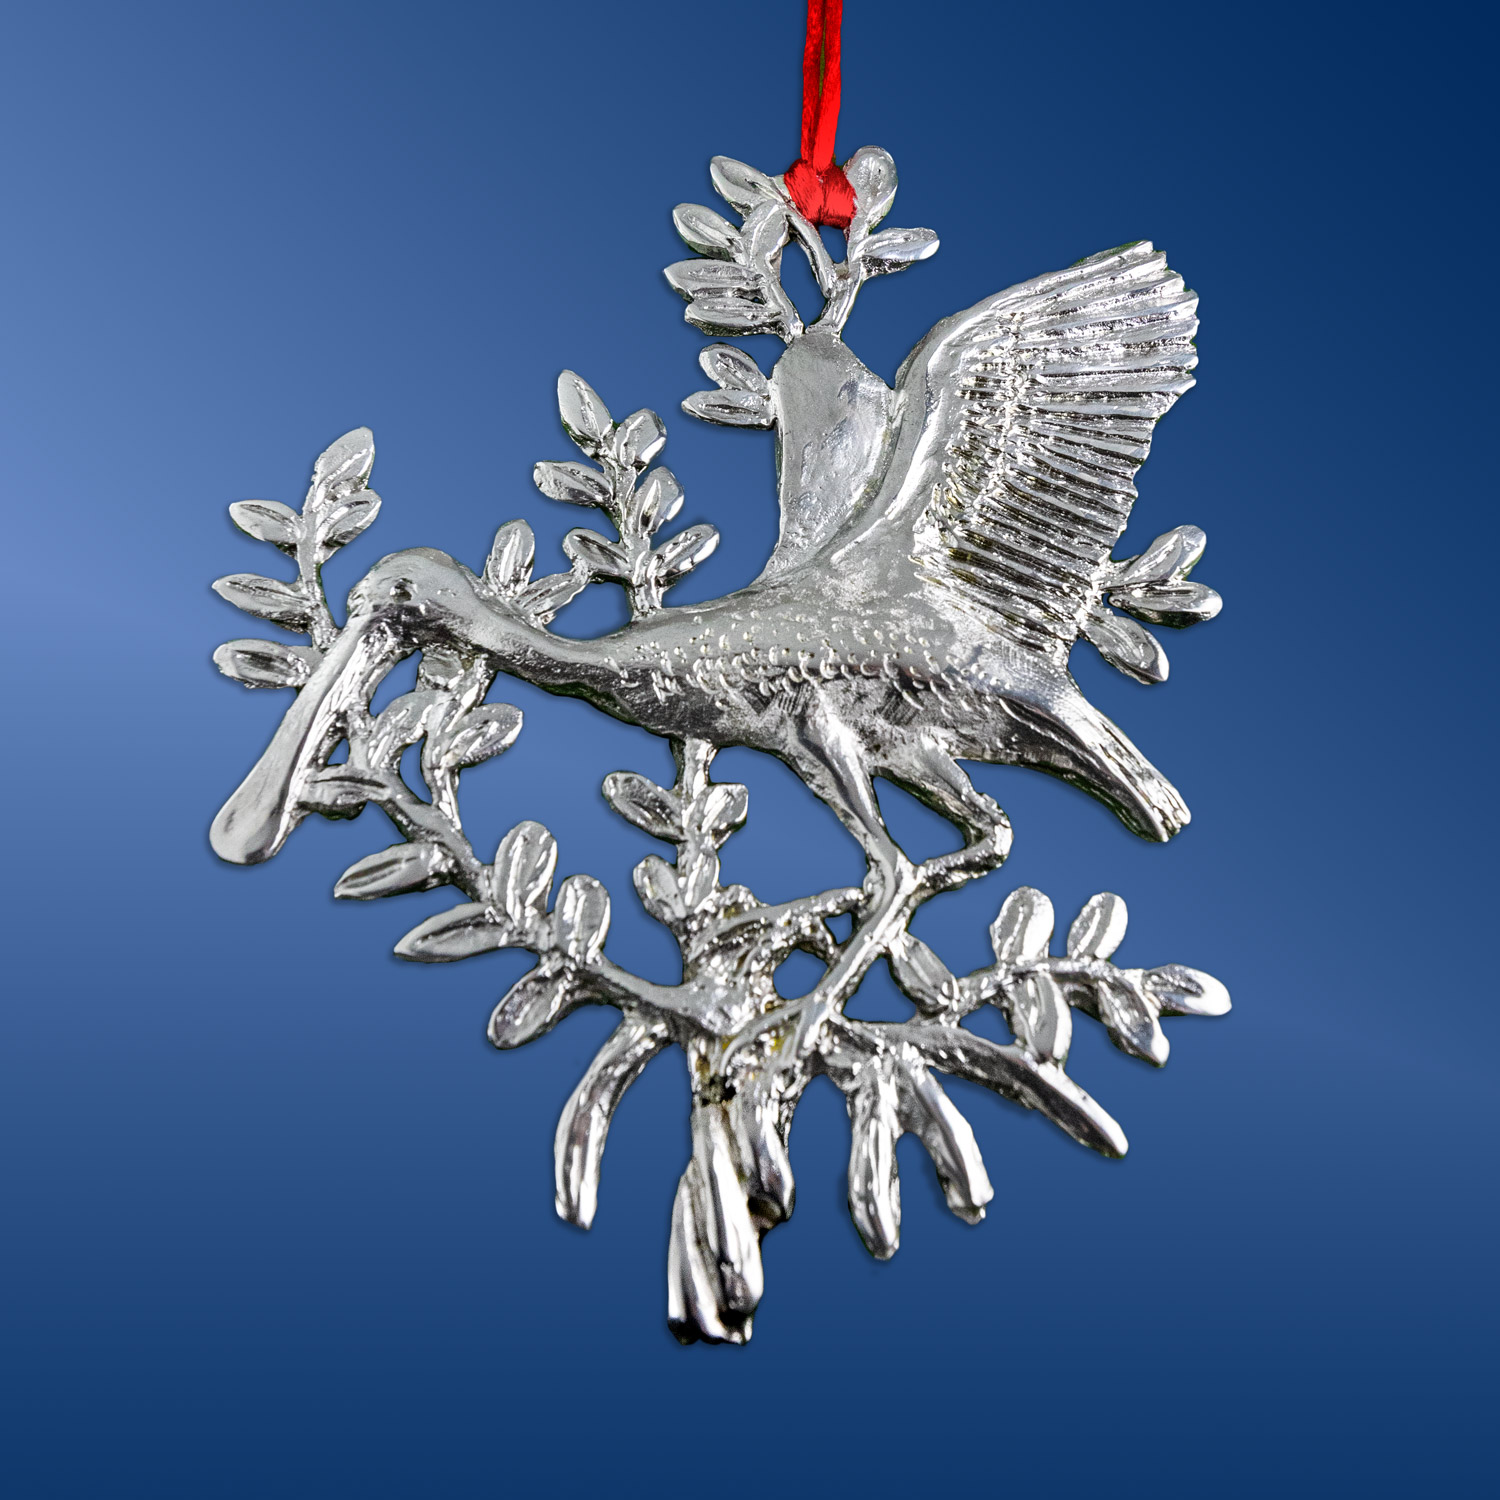 2020 Spoonbill Ornament by Charles H. Reinike III